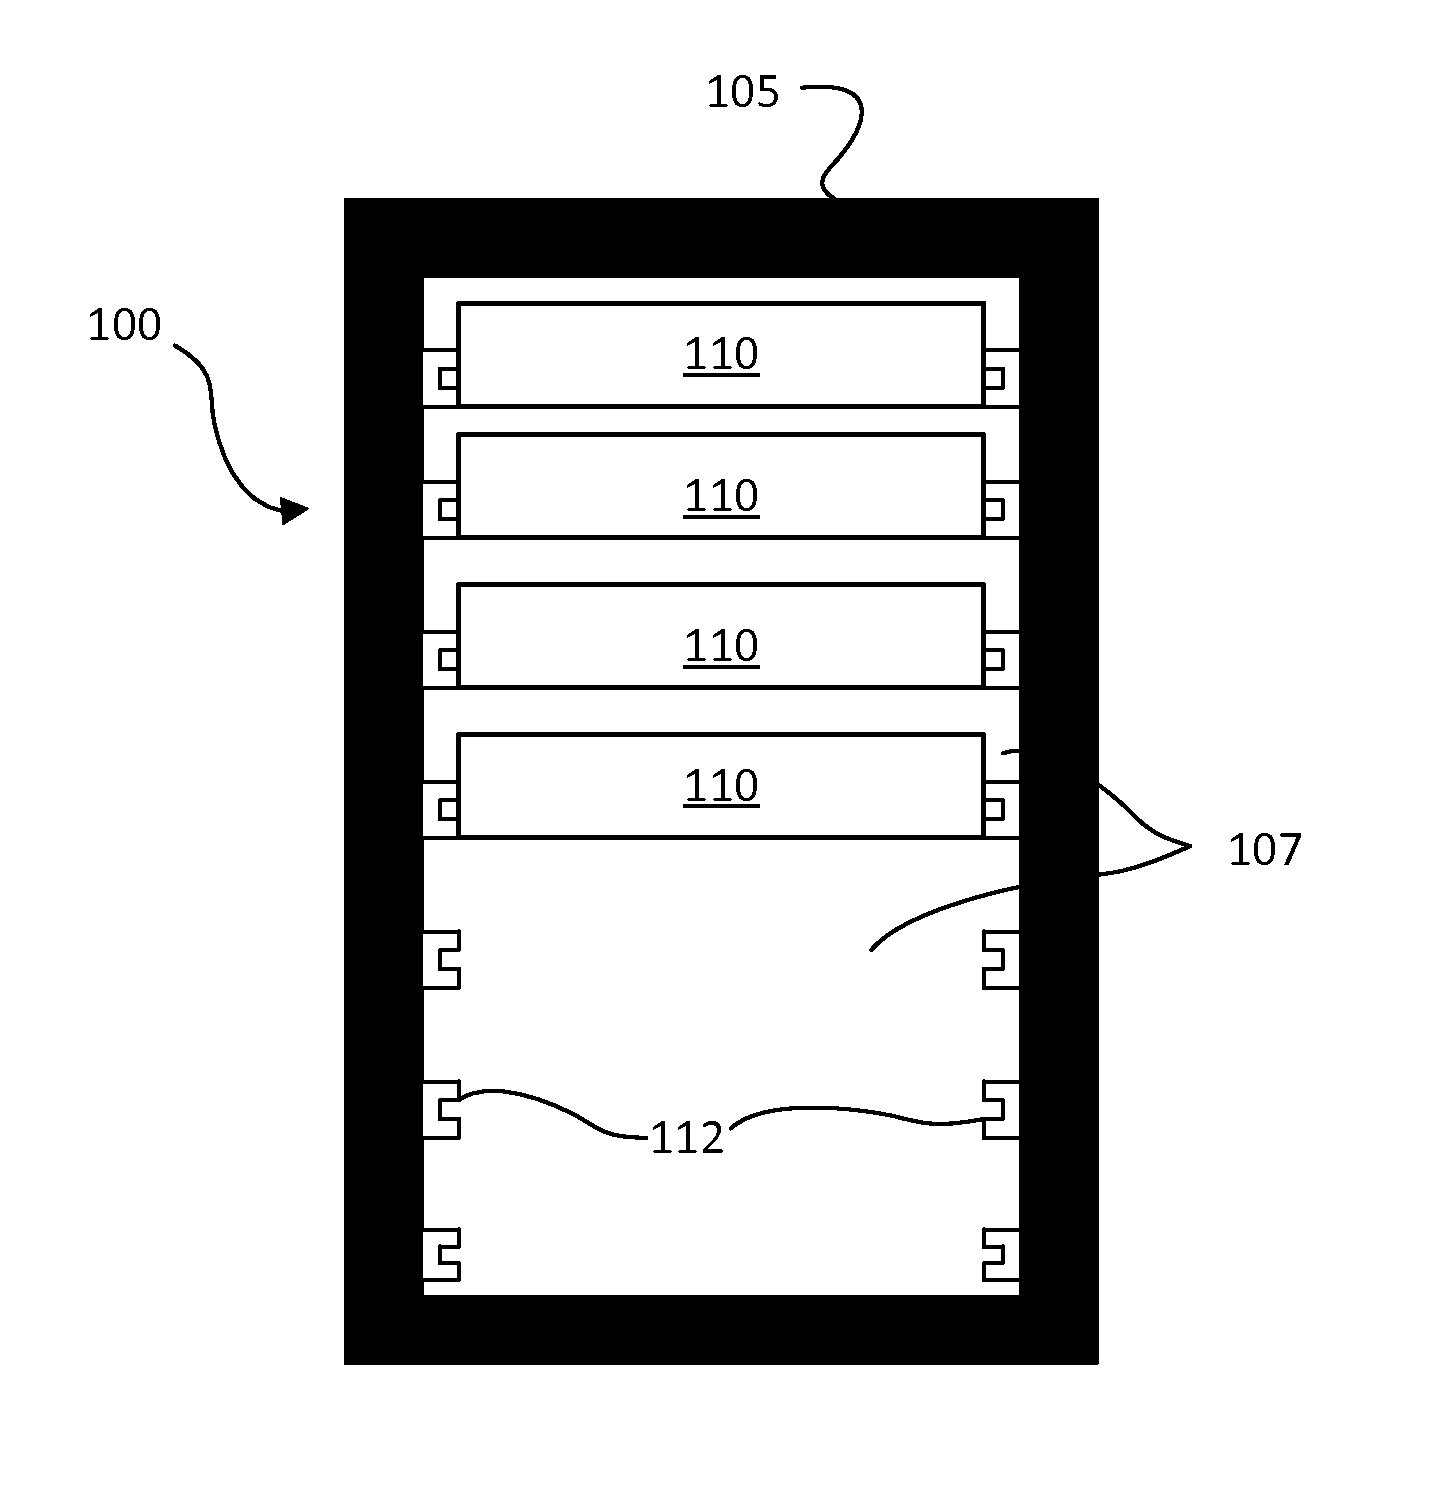 Thermosiphon Systems for Electronic Devices